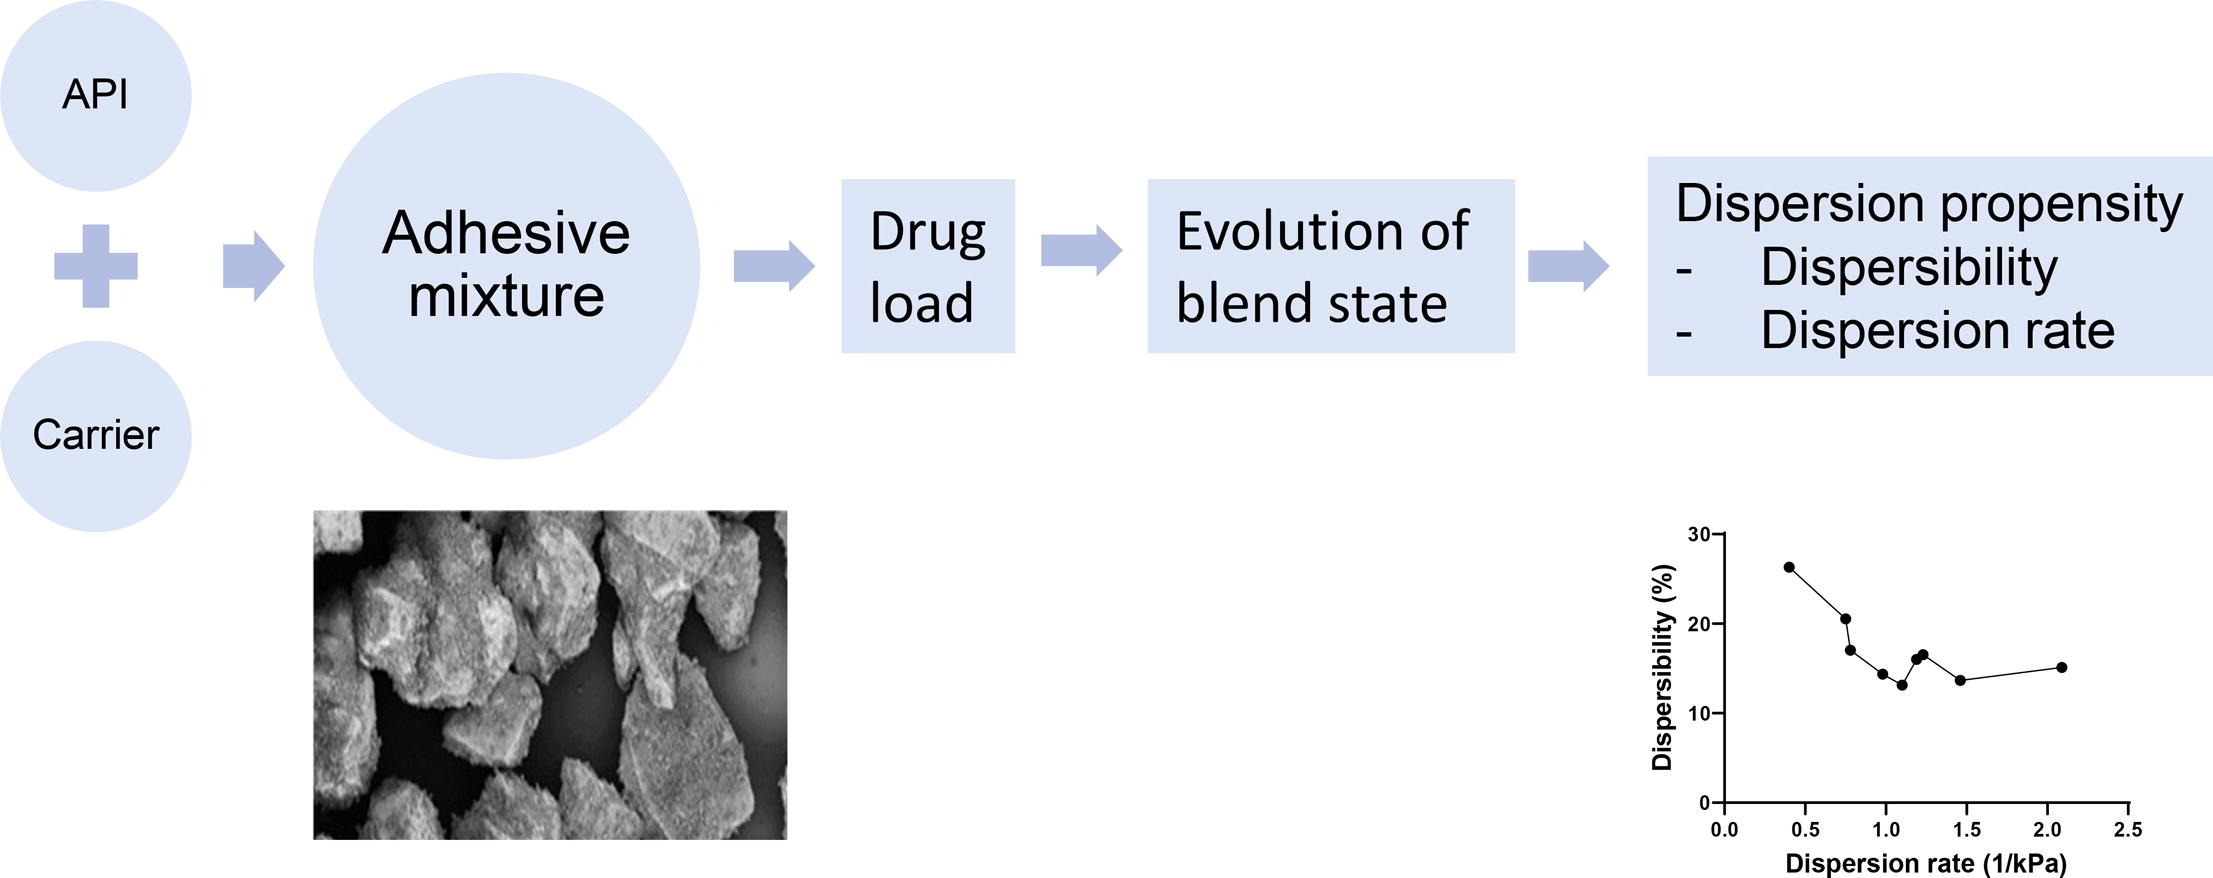 Effect of drug load on the aerosolisation propensity of binary adhesive mixtures for inhalation